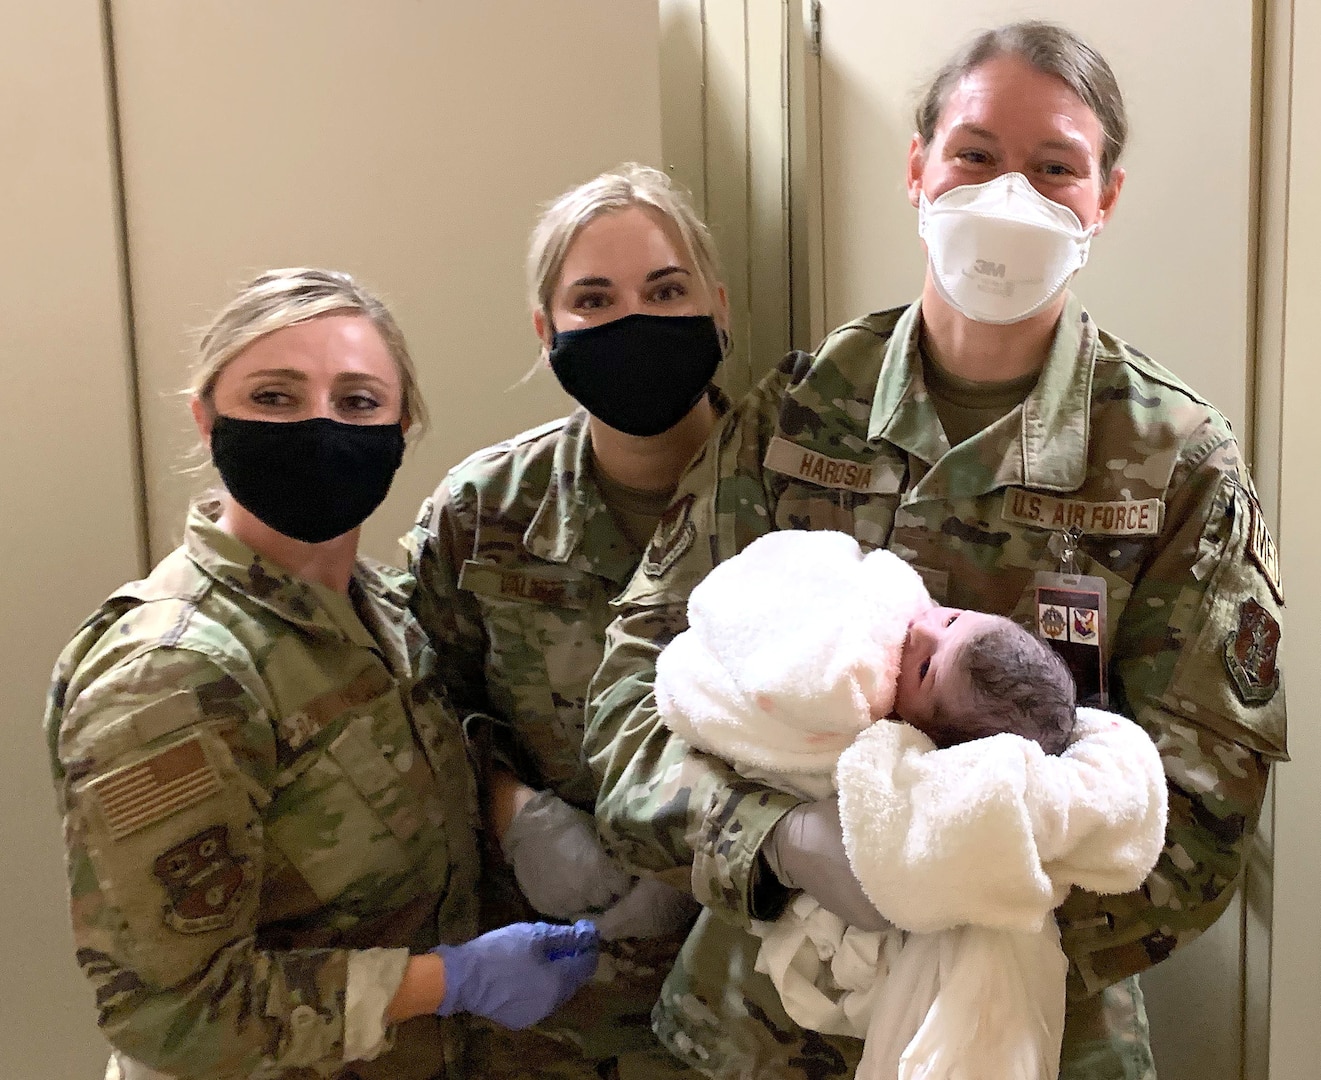 Wyoming Air National Guard Administrative Specialists Senior Master Sgt. Jennifer Ballenger and Tech. Sgt. Shyloh Vallot with New York Air Guard, 2nd Lt. Kristin Harosia just after they assisted the emergency delivery of a baby born to an Afghan guest of Operation Allies Welcome at McGuire-Dix-Lakehurst Air Force Base, New Jersey.